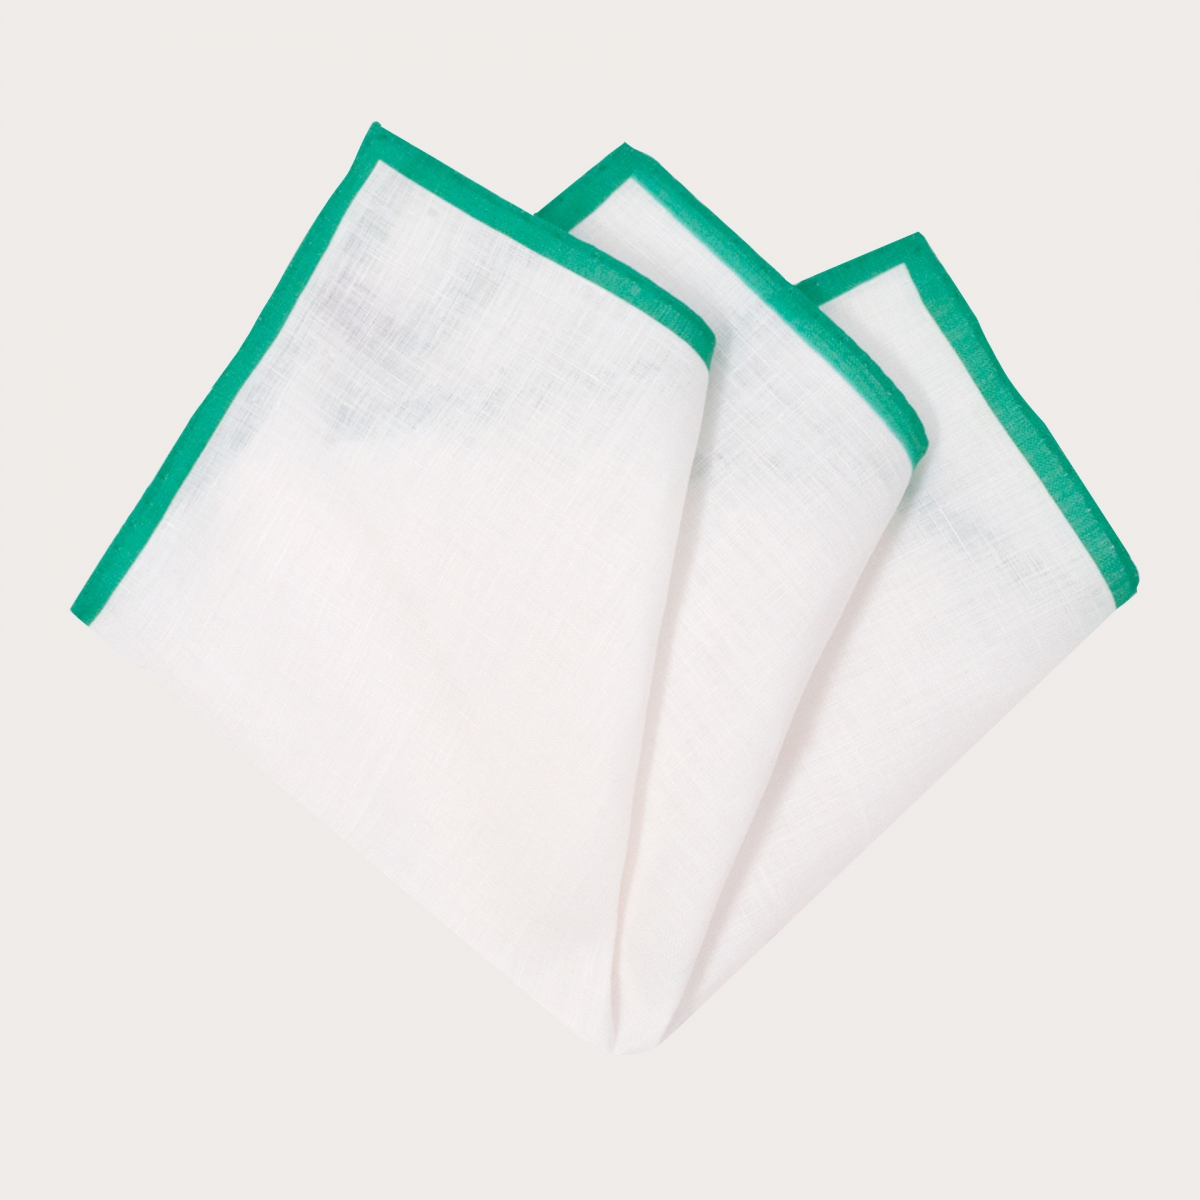 BRUCLE Linen pocket square, white with emerald green edge